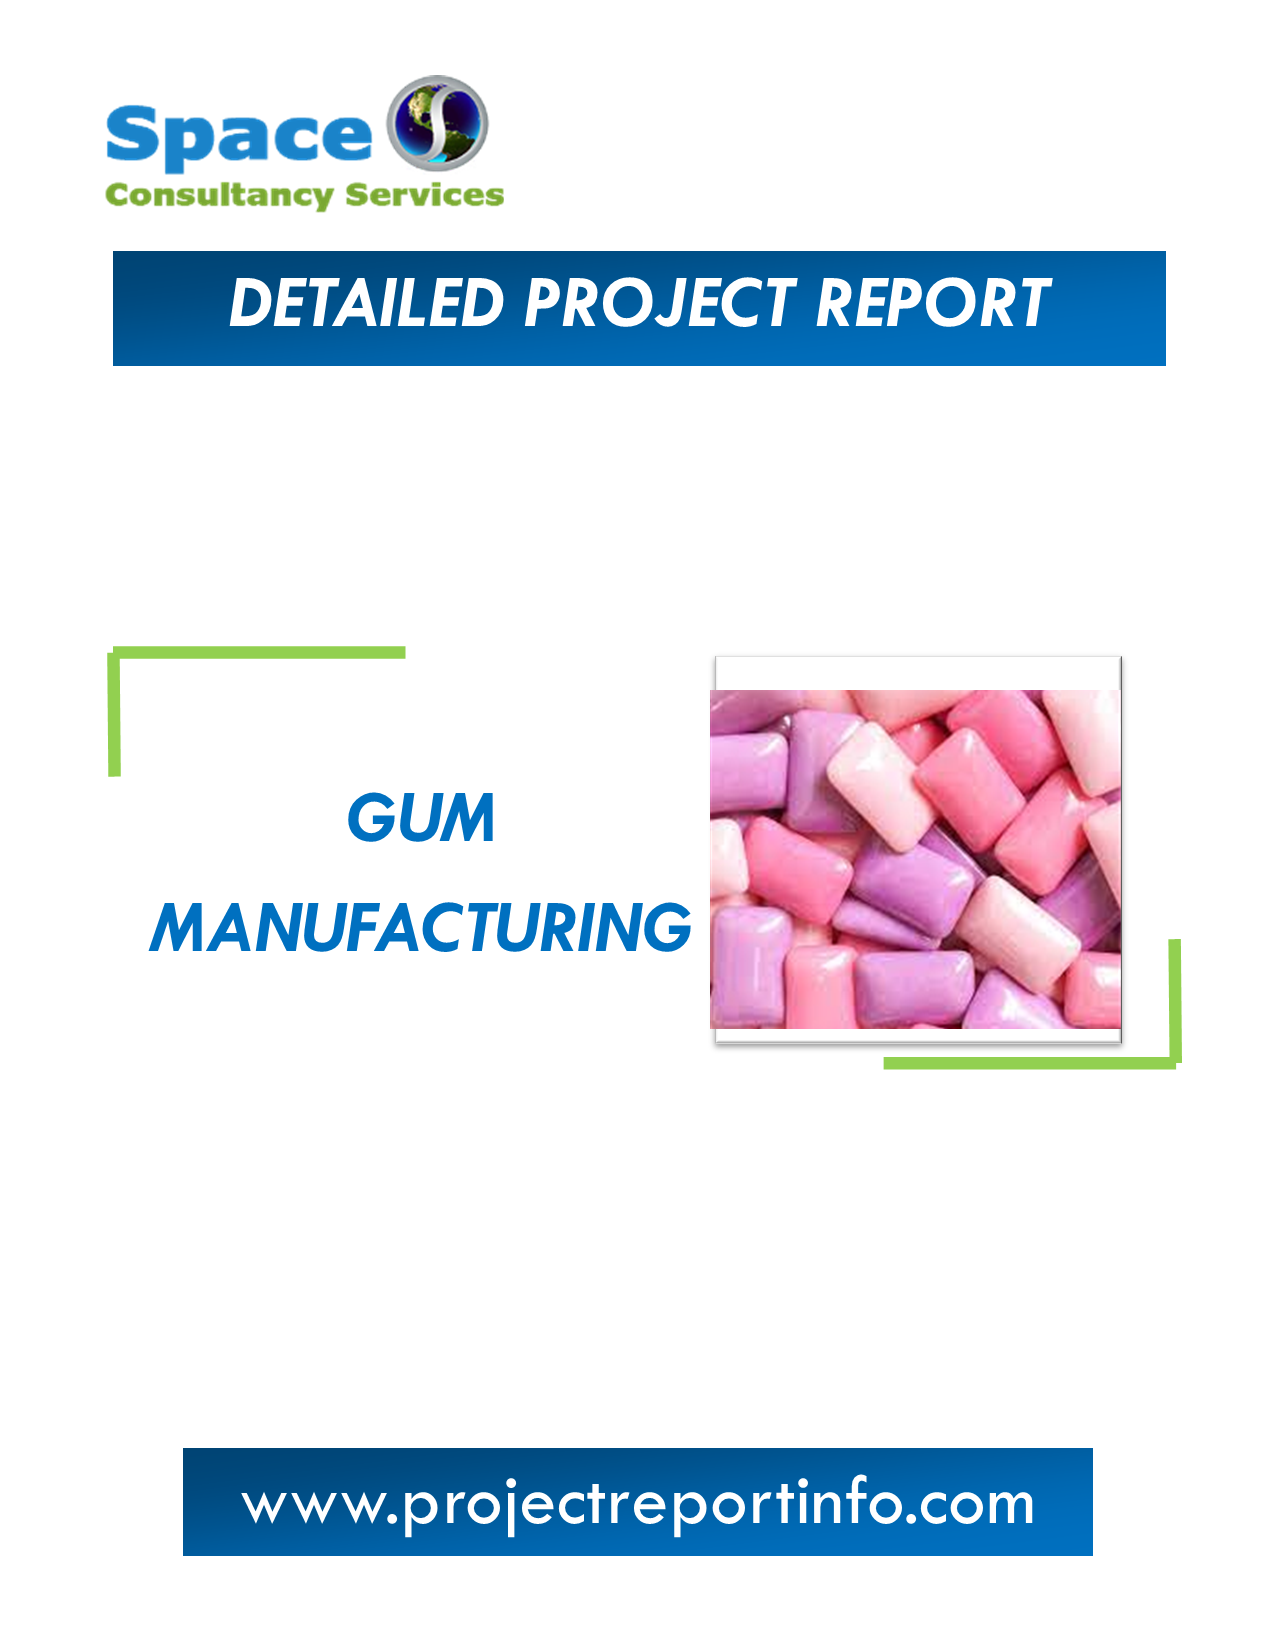 Project Report on Gum Manufacturing